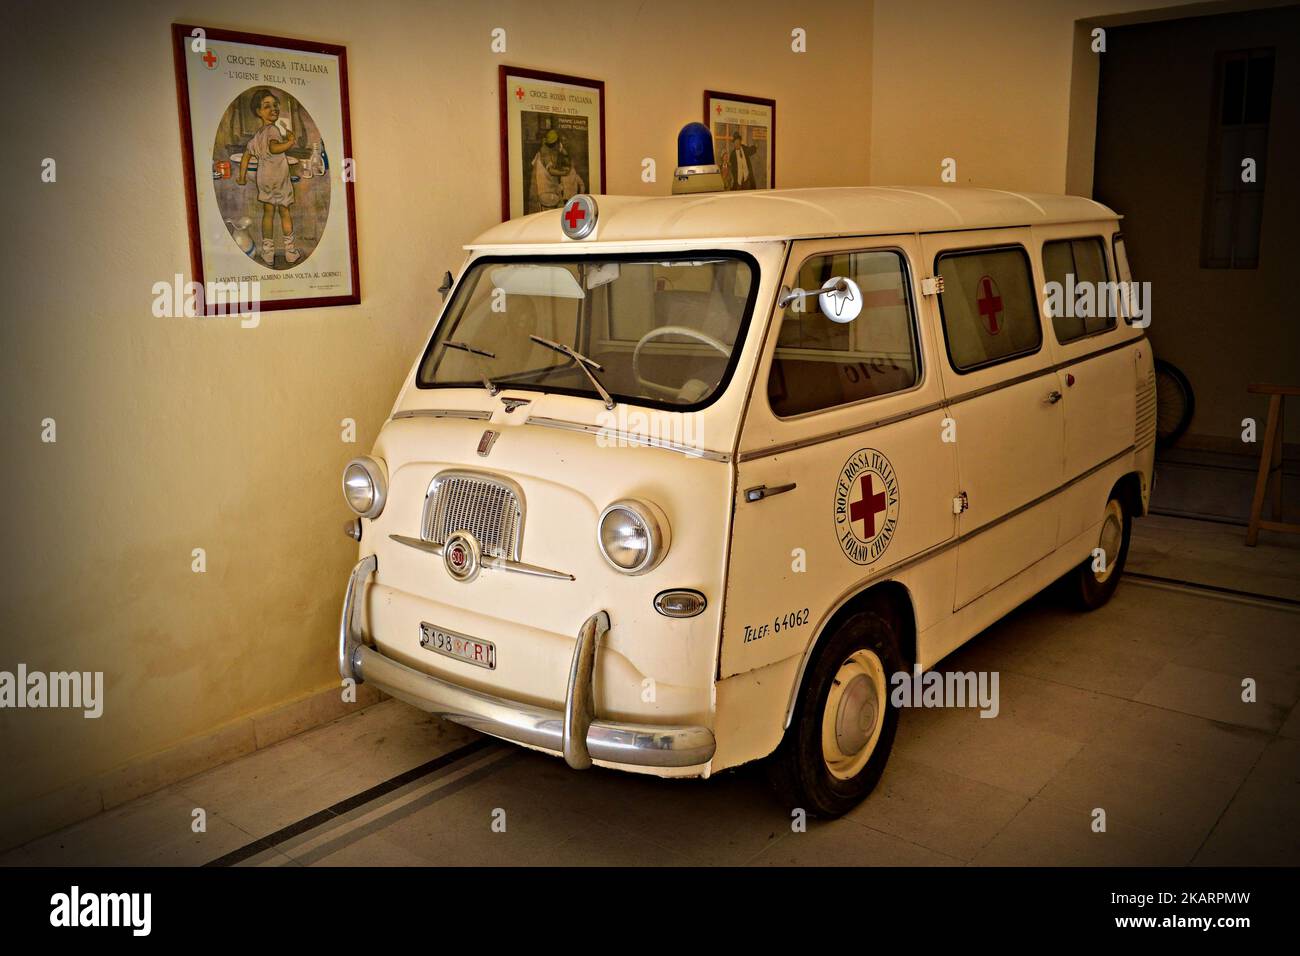 historical ambulance of 1950 of the Italian Red Cross Stock Photo